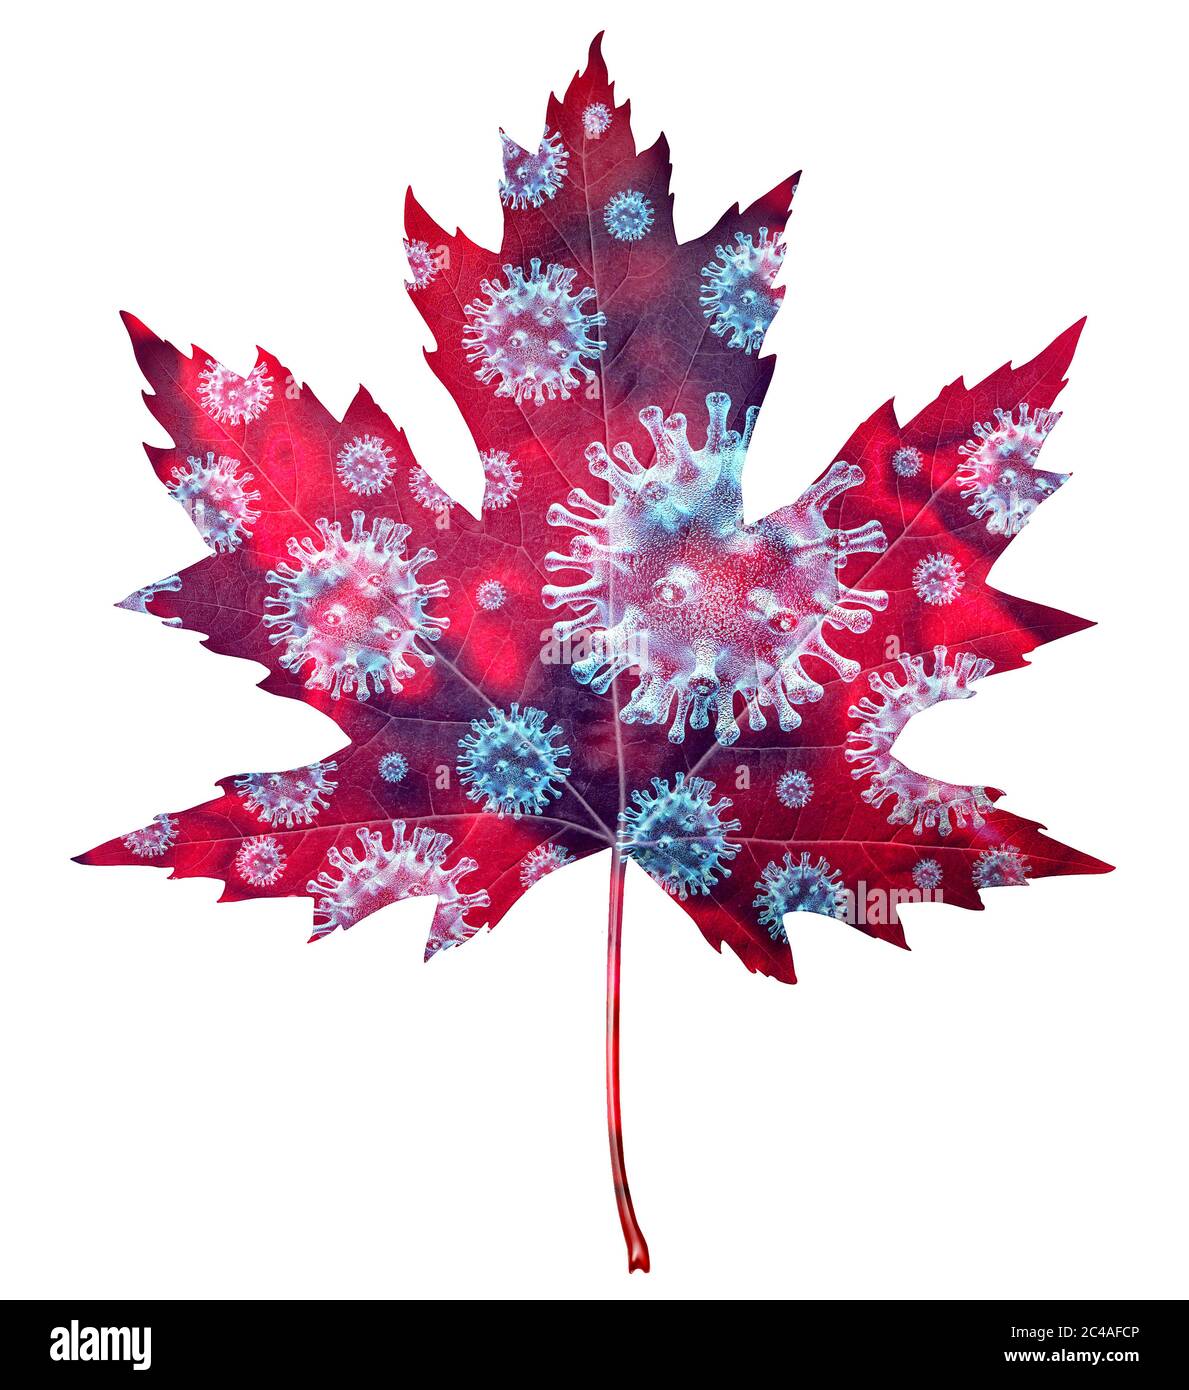 Canadian coronavirus outbreak and influenza in Canada as dangerous flu strain cases as a pandemic medical health risk concept shaped as a red maple. Stock Photo